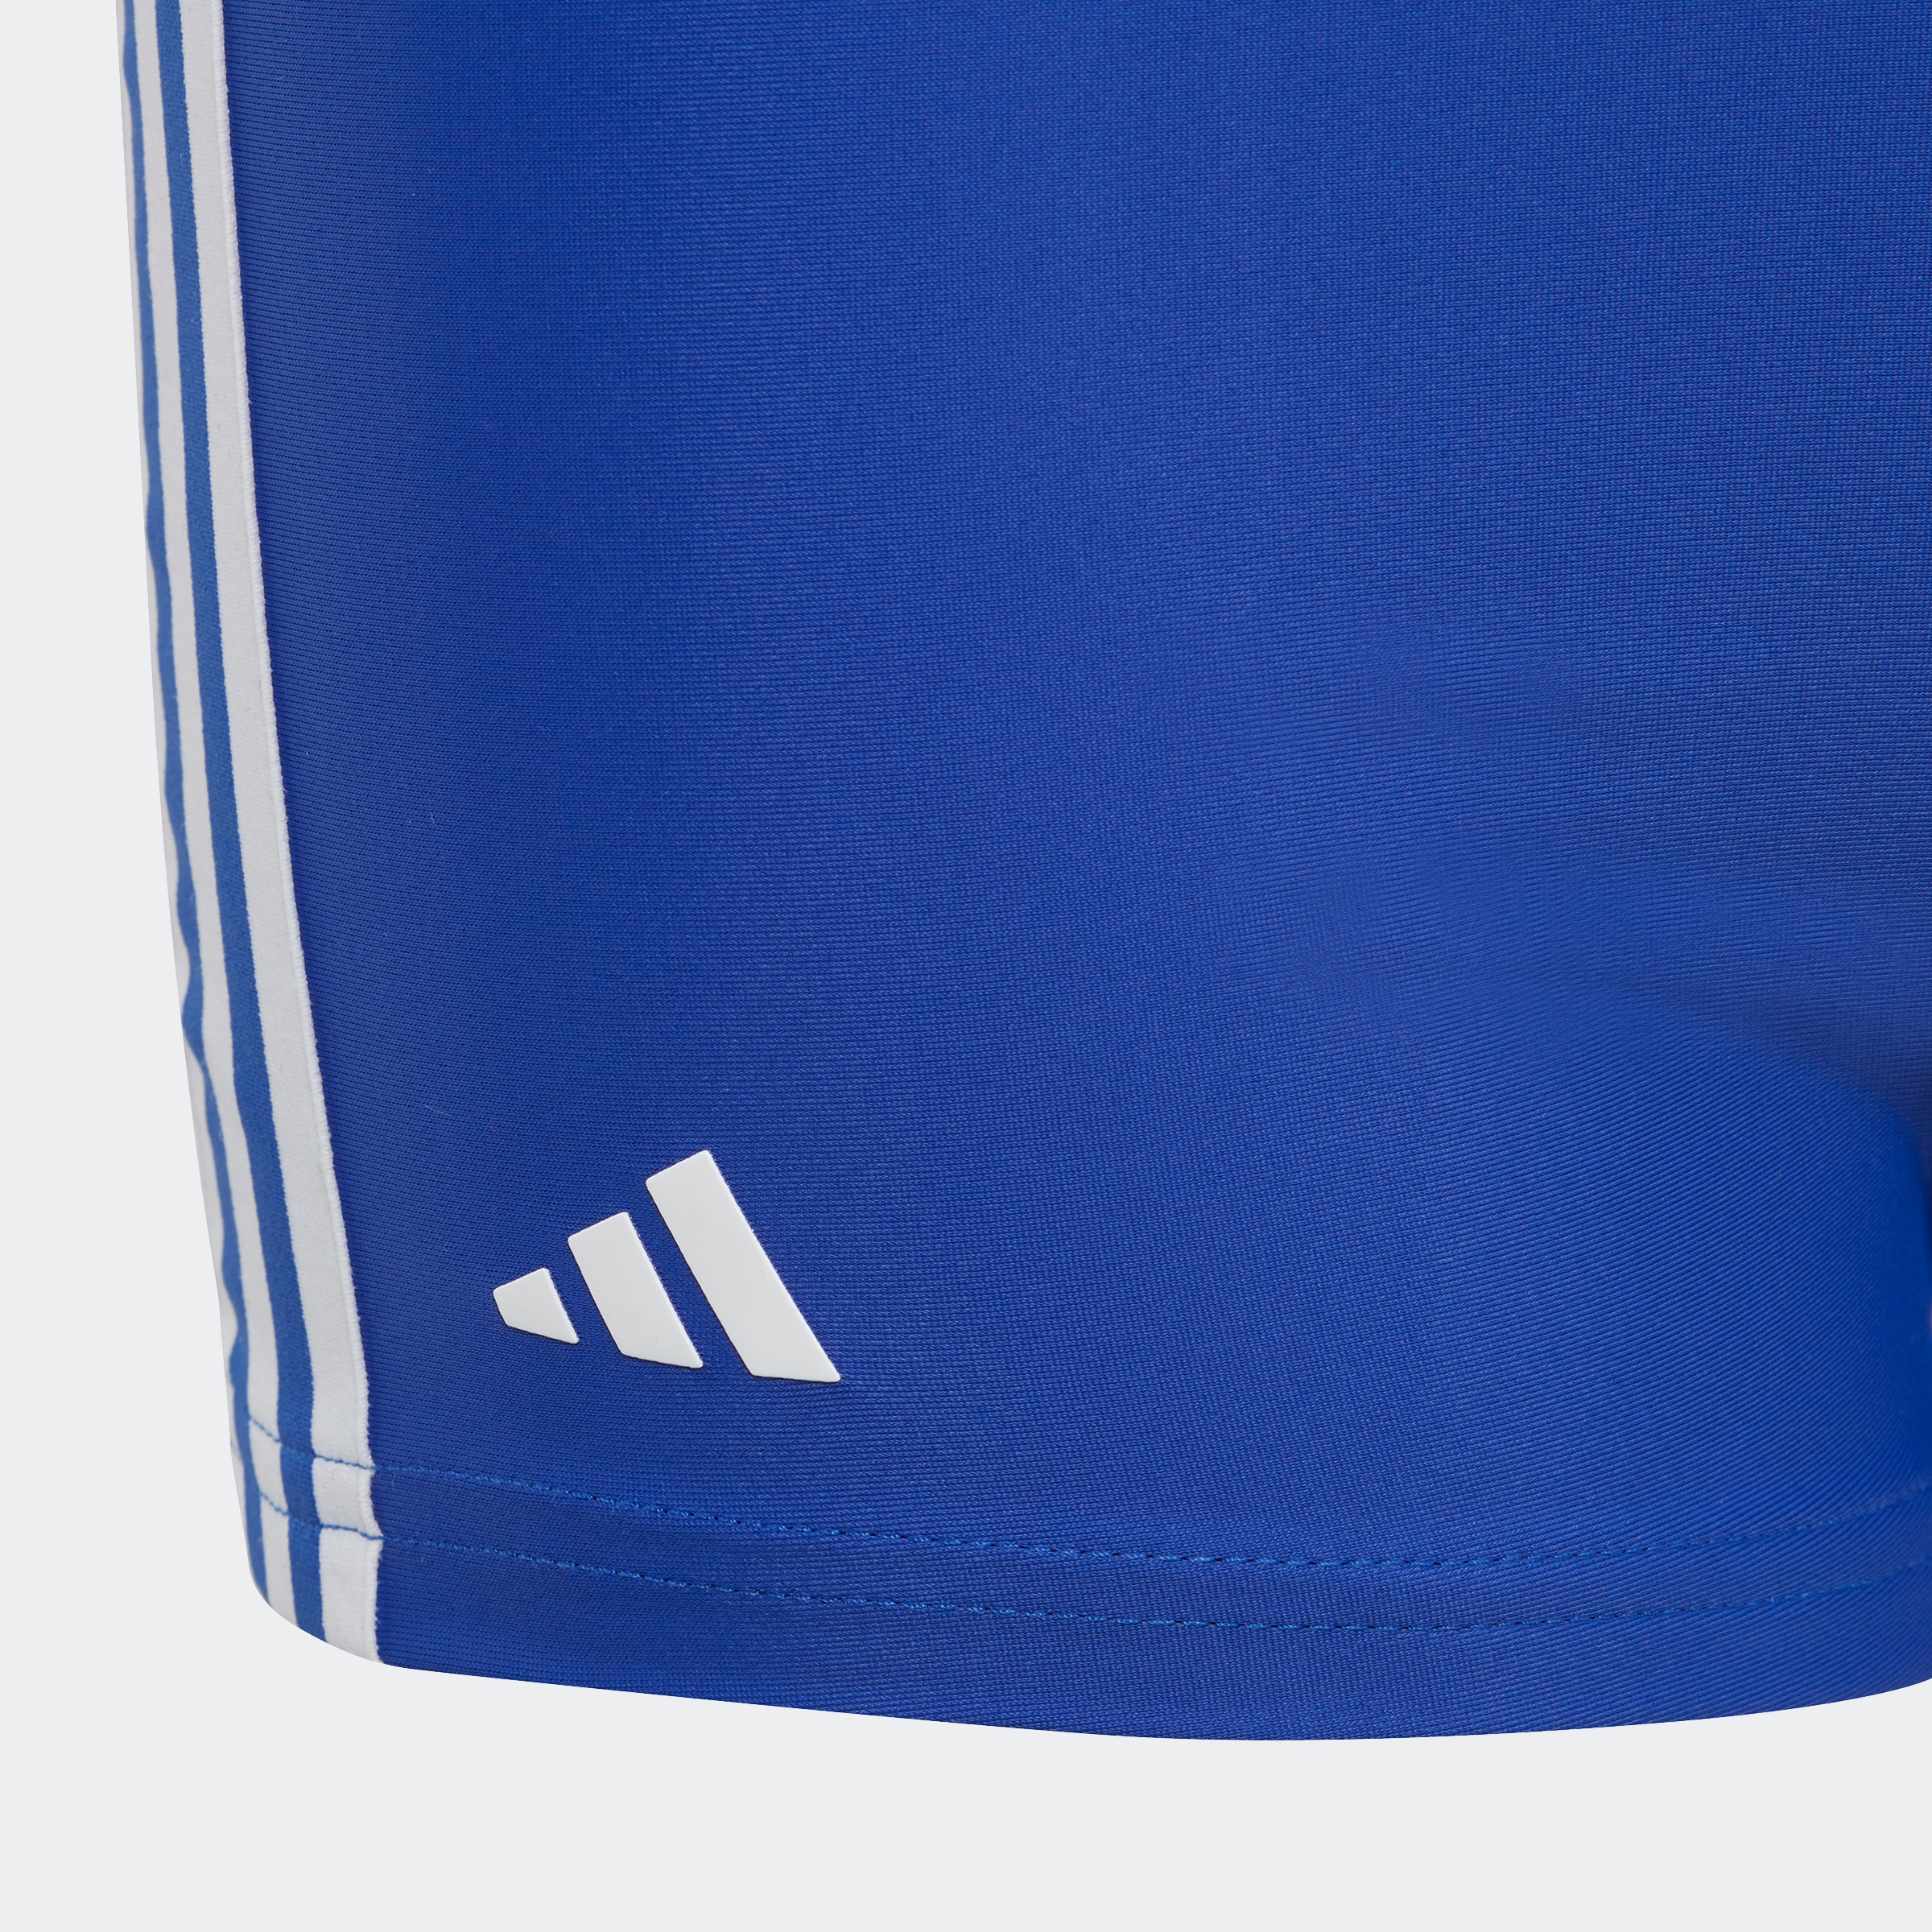 adidas Performance Badehose »3S BOXER«, (1 St.) bei